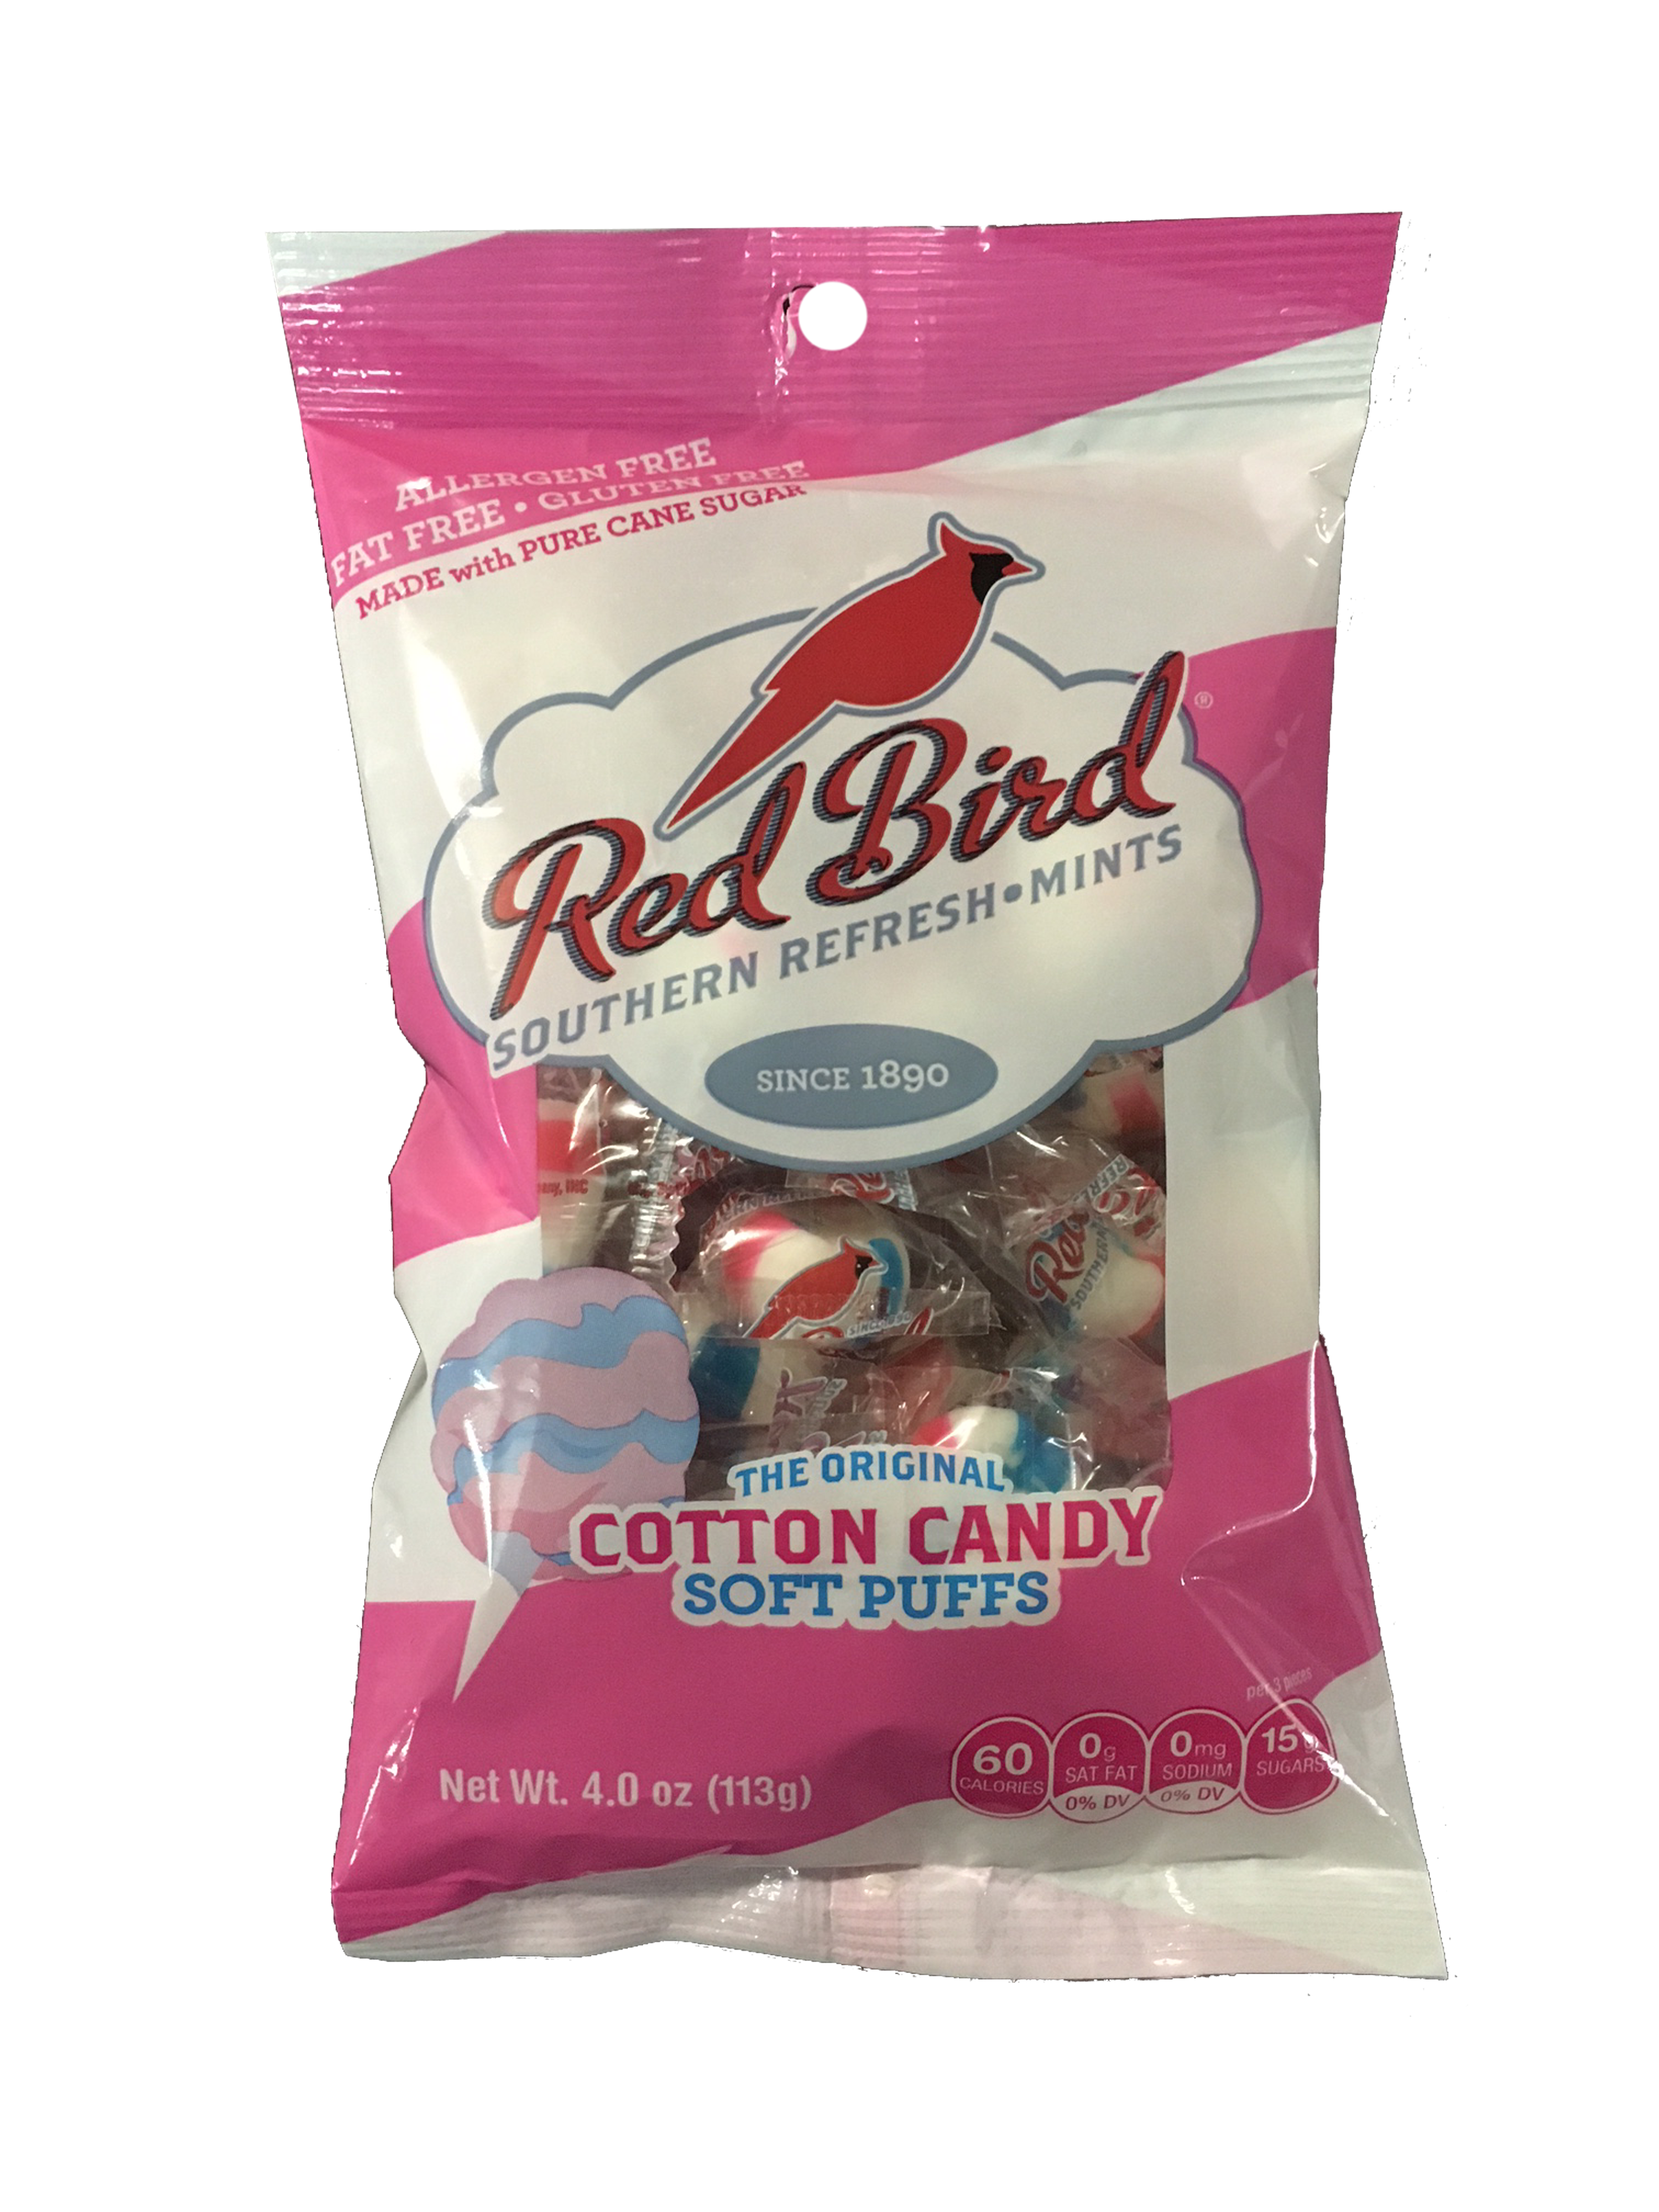 Red Bird Cotton Candy Puffs - a sweet treat from your youth by Piedmont